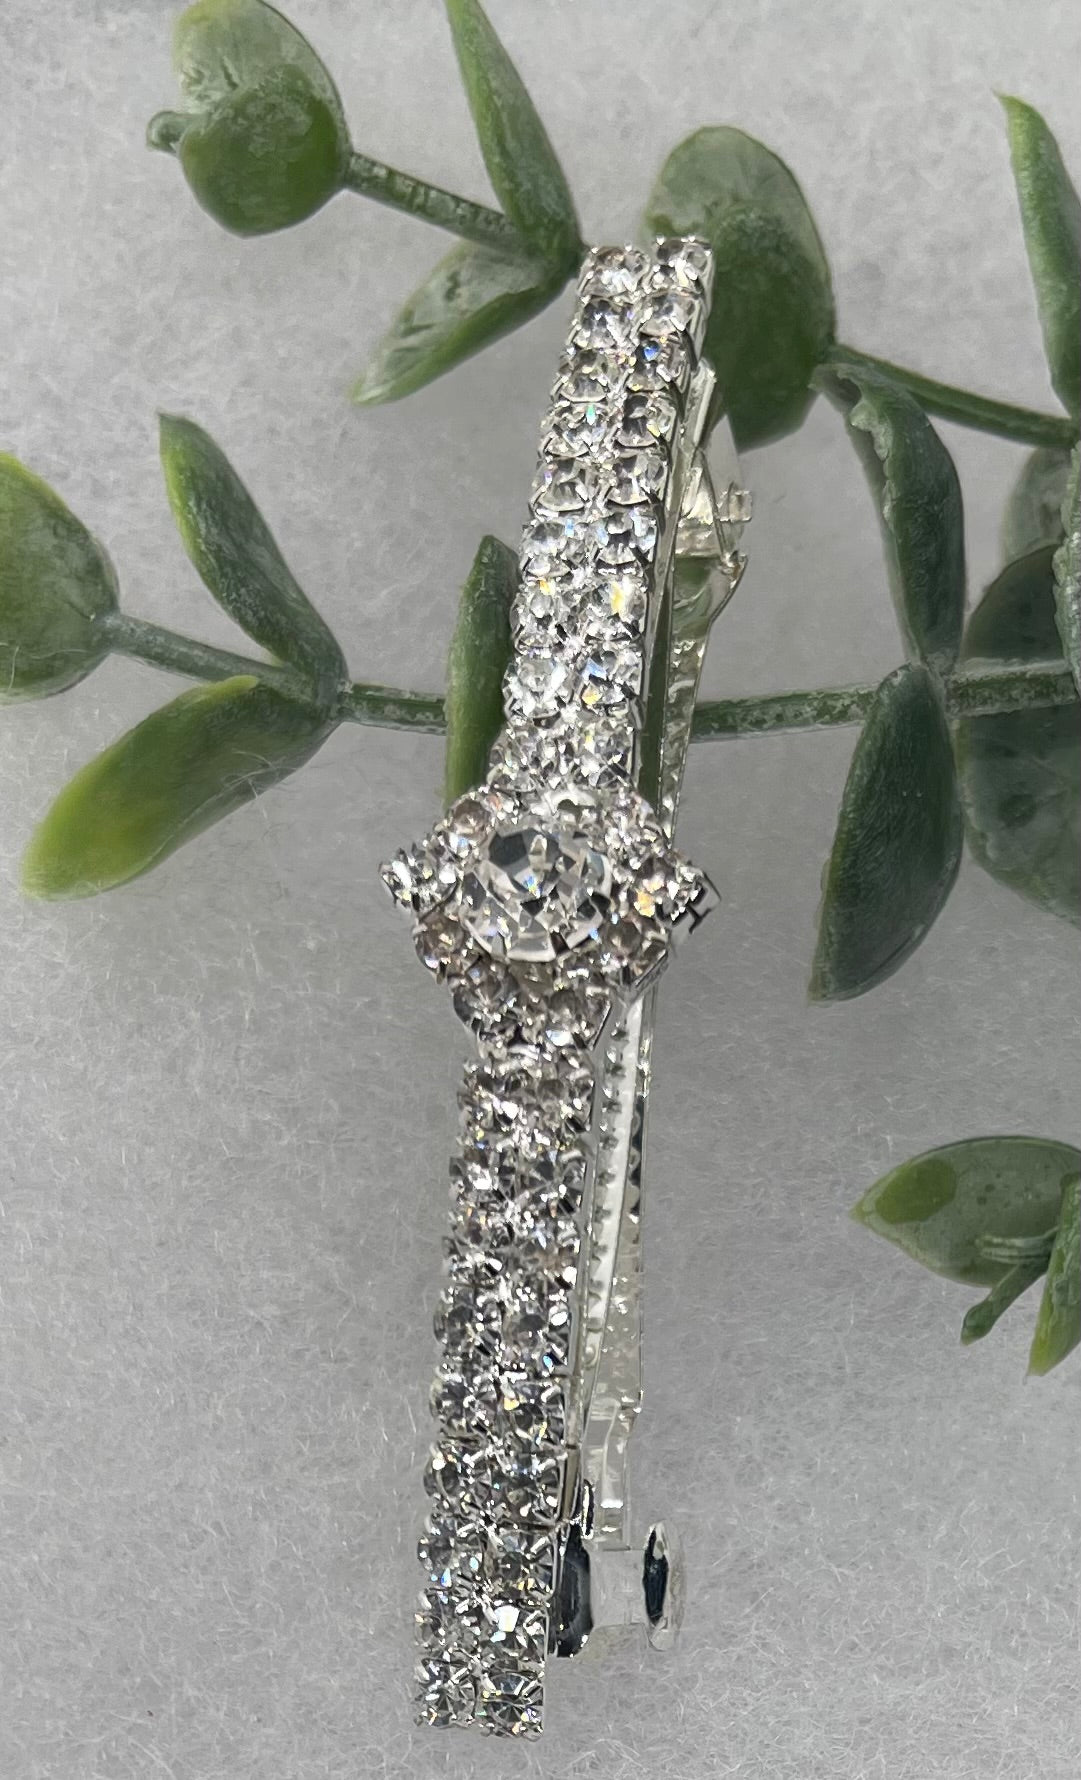 Clear Crystal Rhinestone Barrette approximately 3.0”Metal silver tone formal hair accessory gift wedding bridal shower accessories